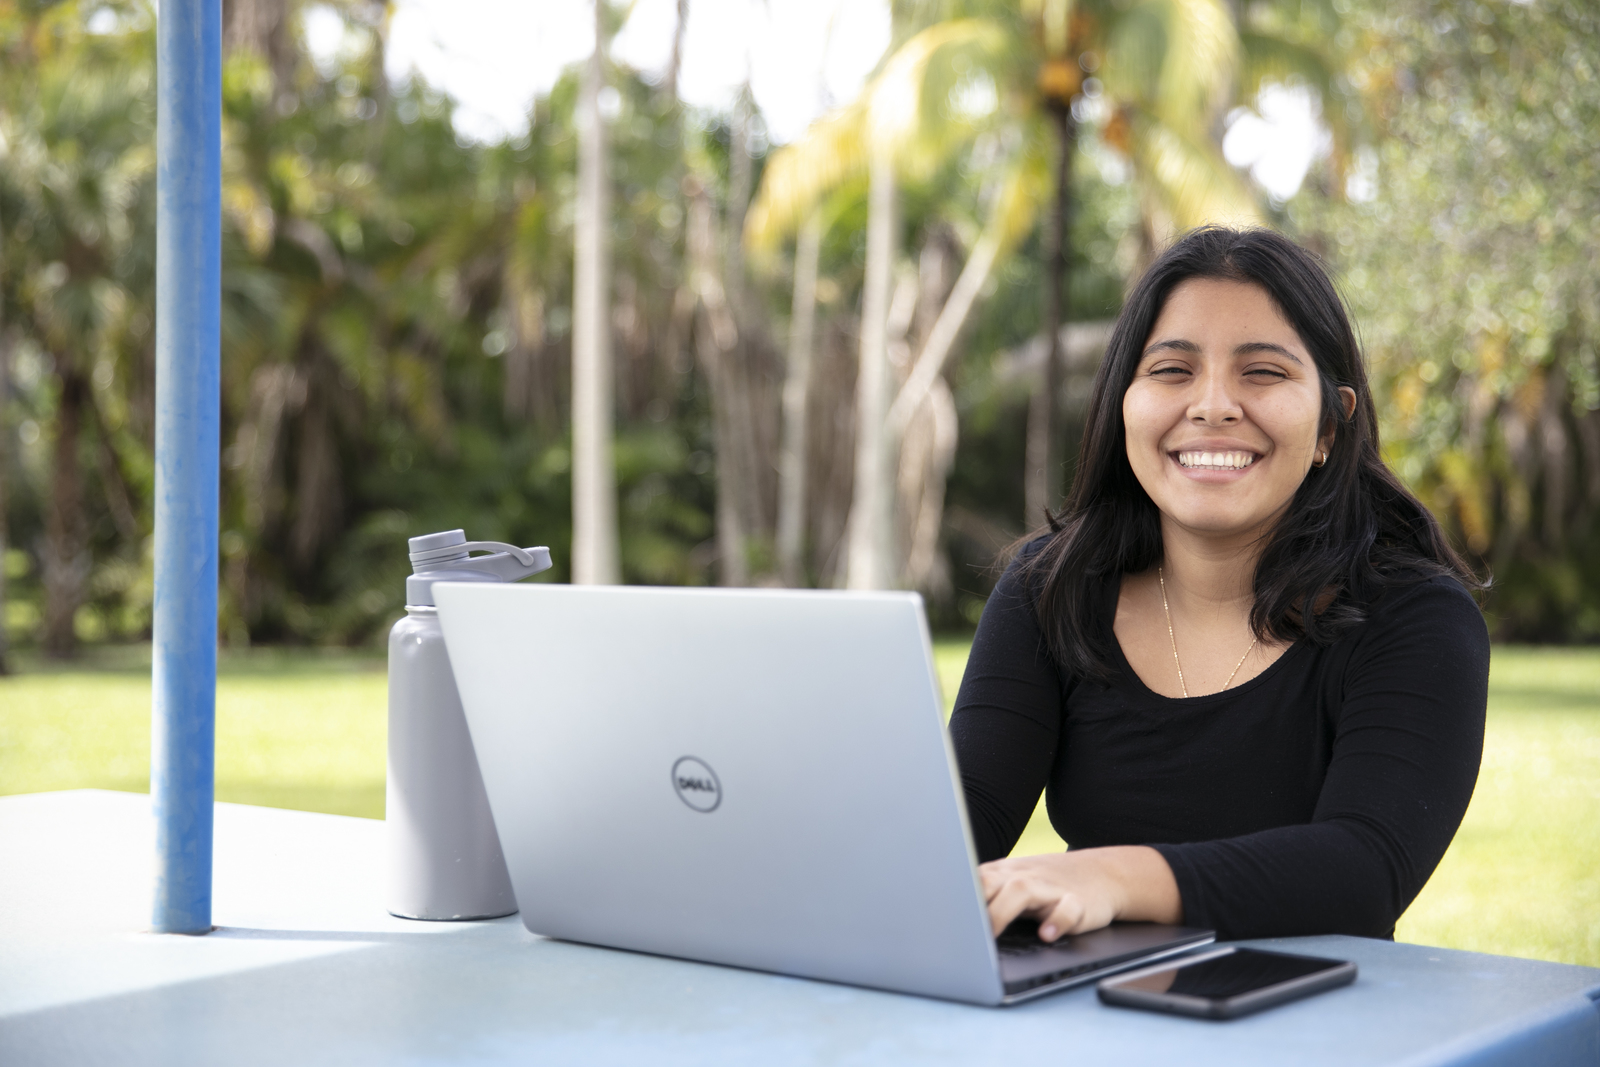 FAU Student smiling with a laptop